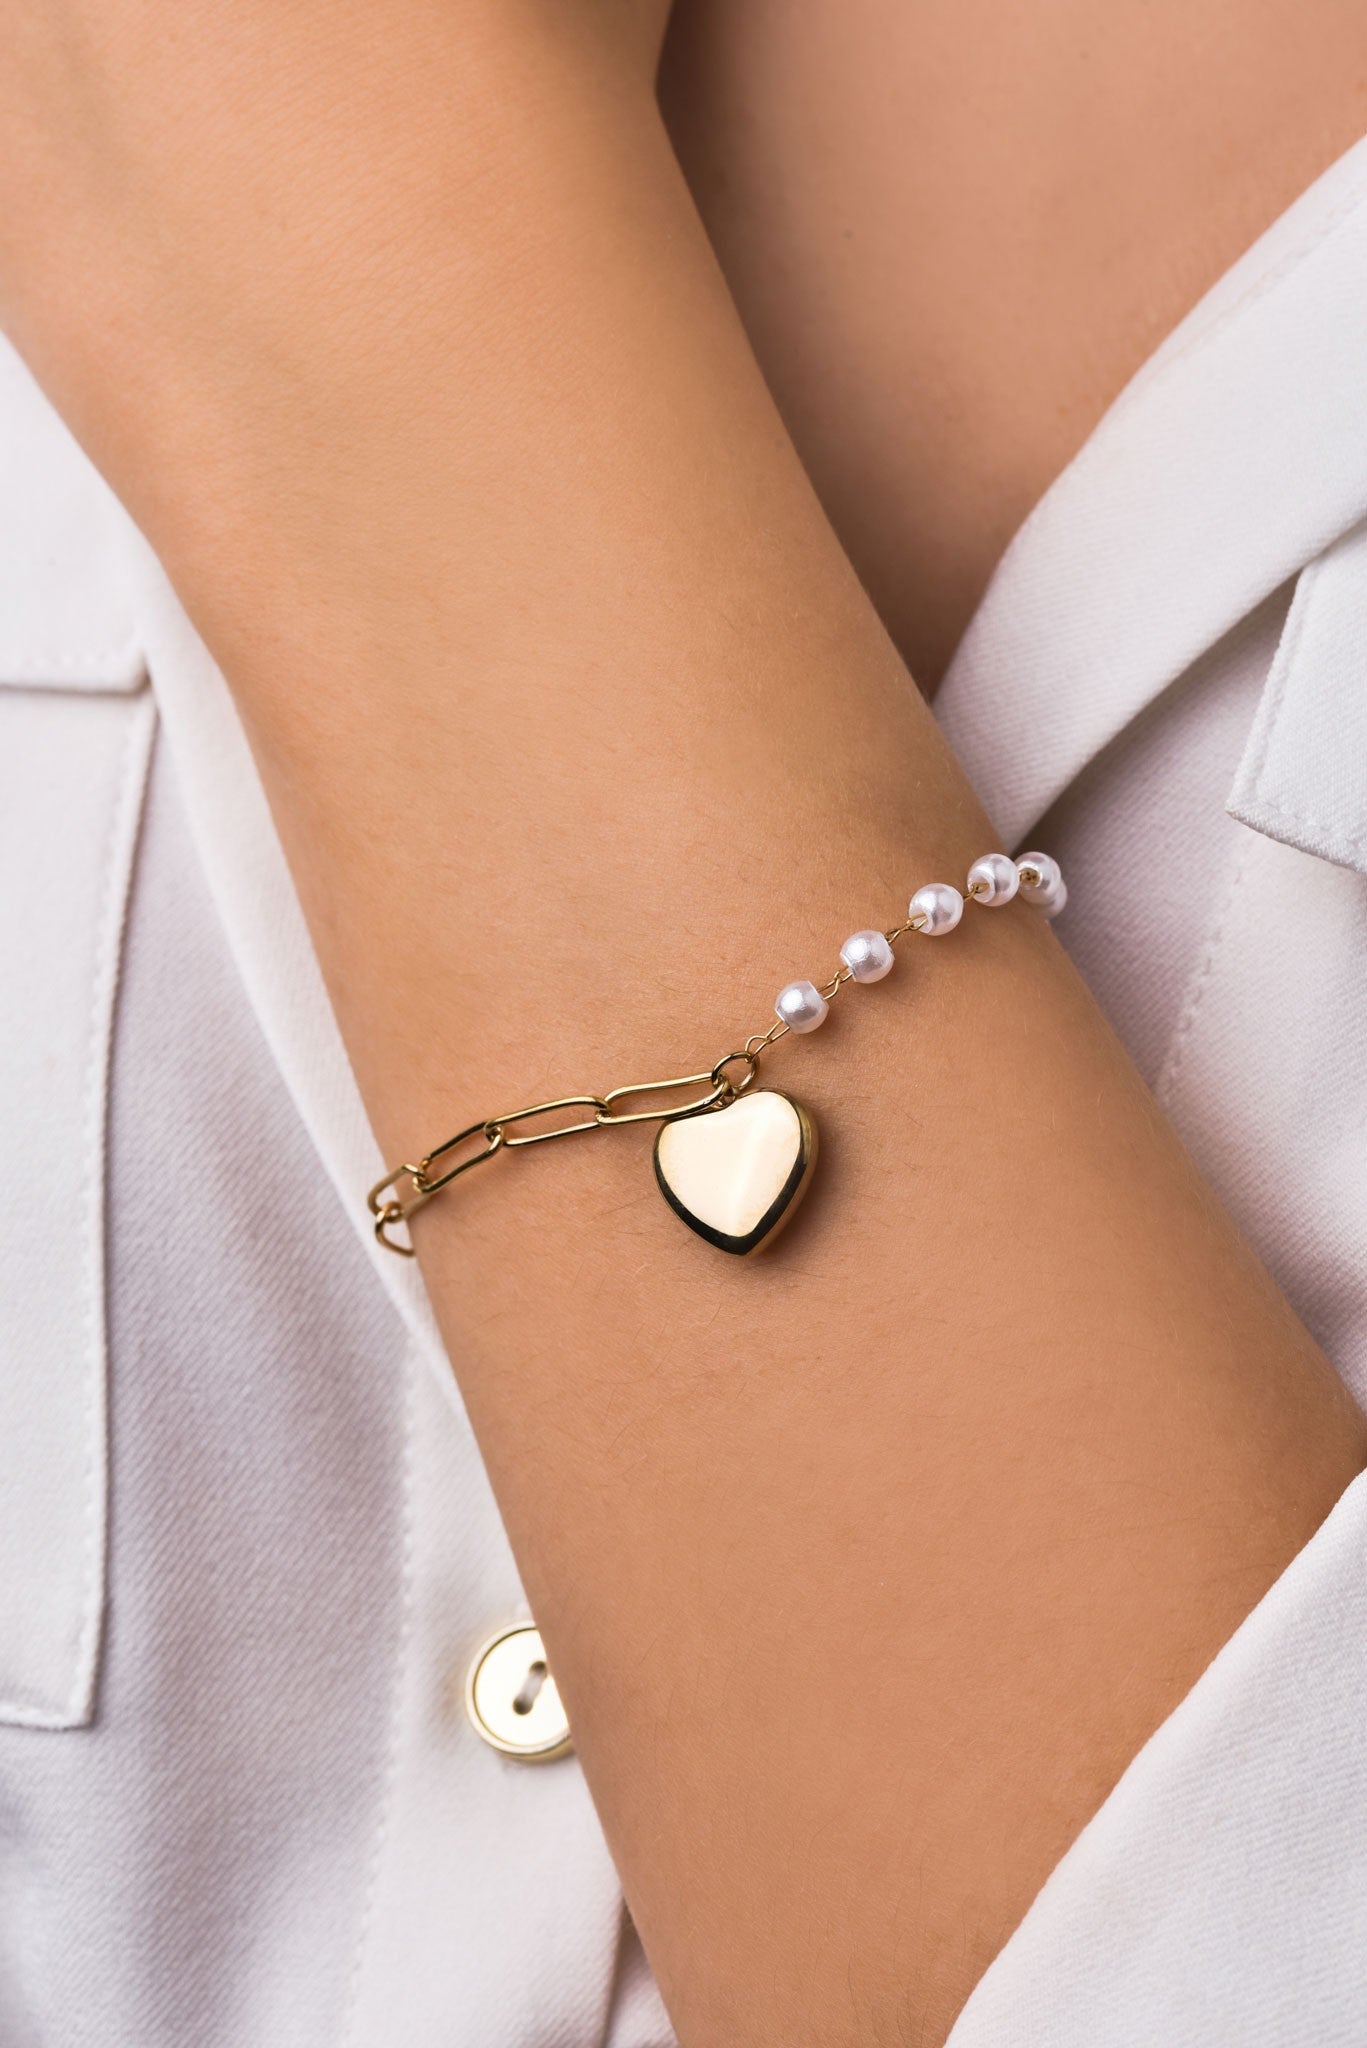 14k Gold Plated Pearl Bracelet with Heart Pendant